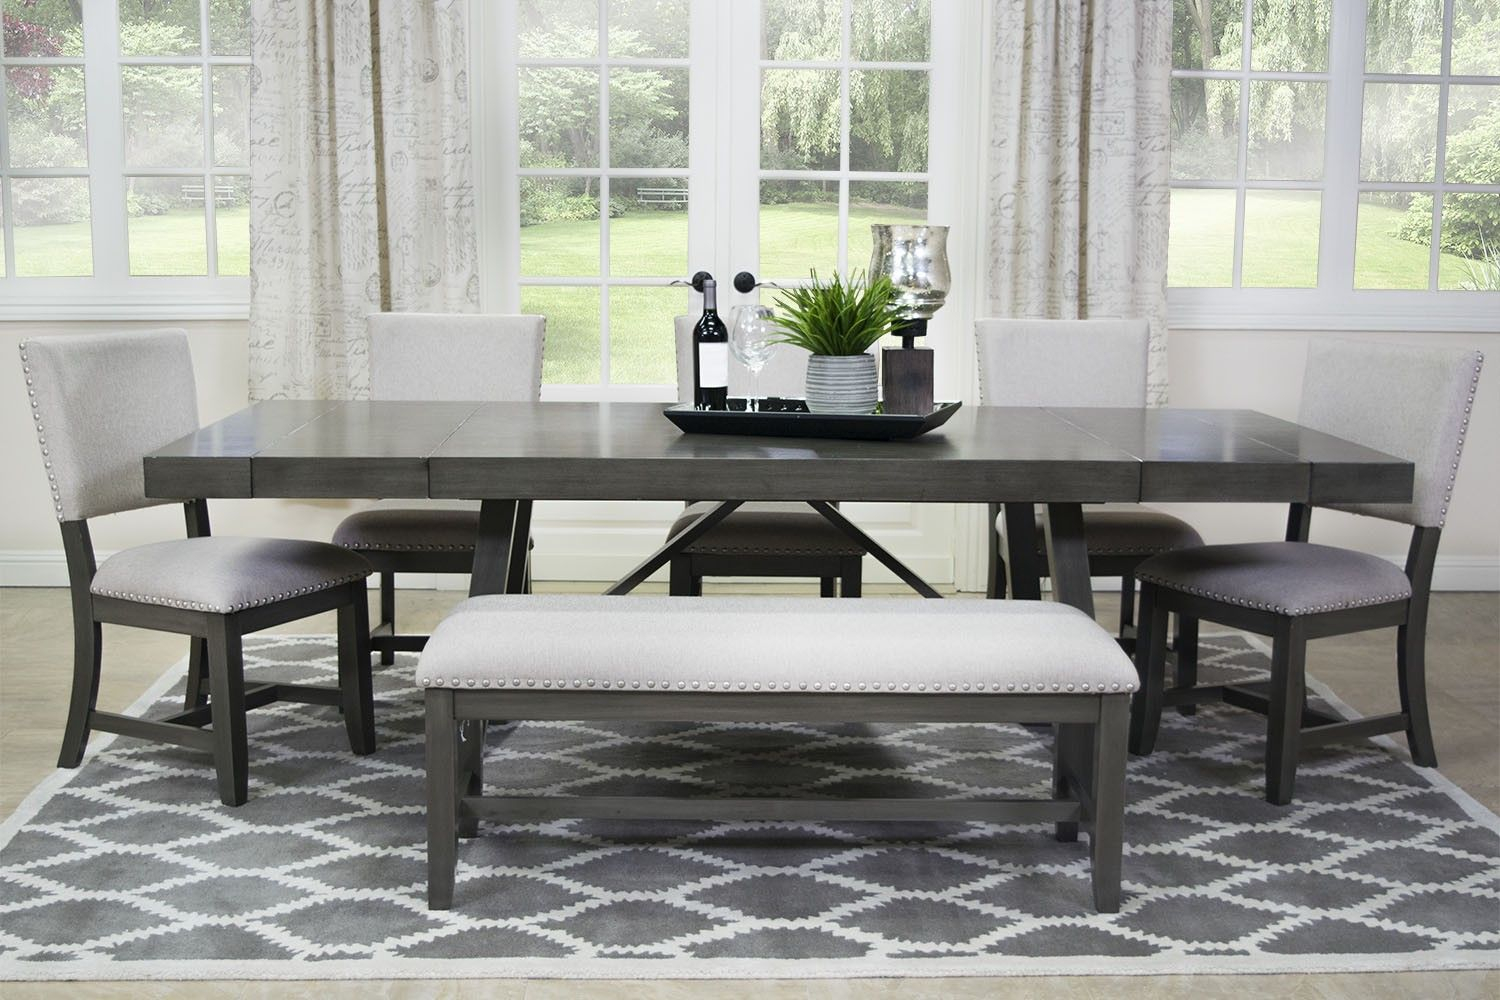 Mor Furniture For Less The Nebraska Dining Room Mor with sizing 1500 X 1000